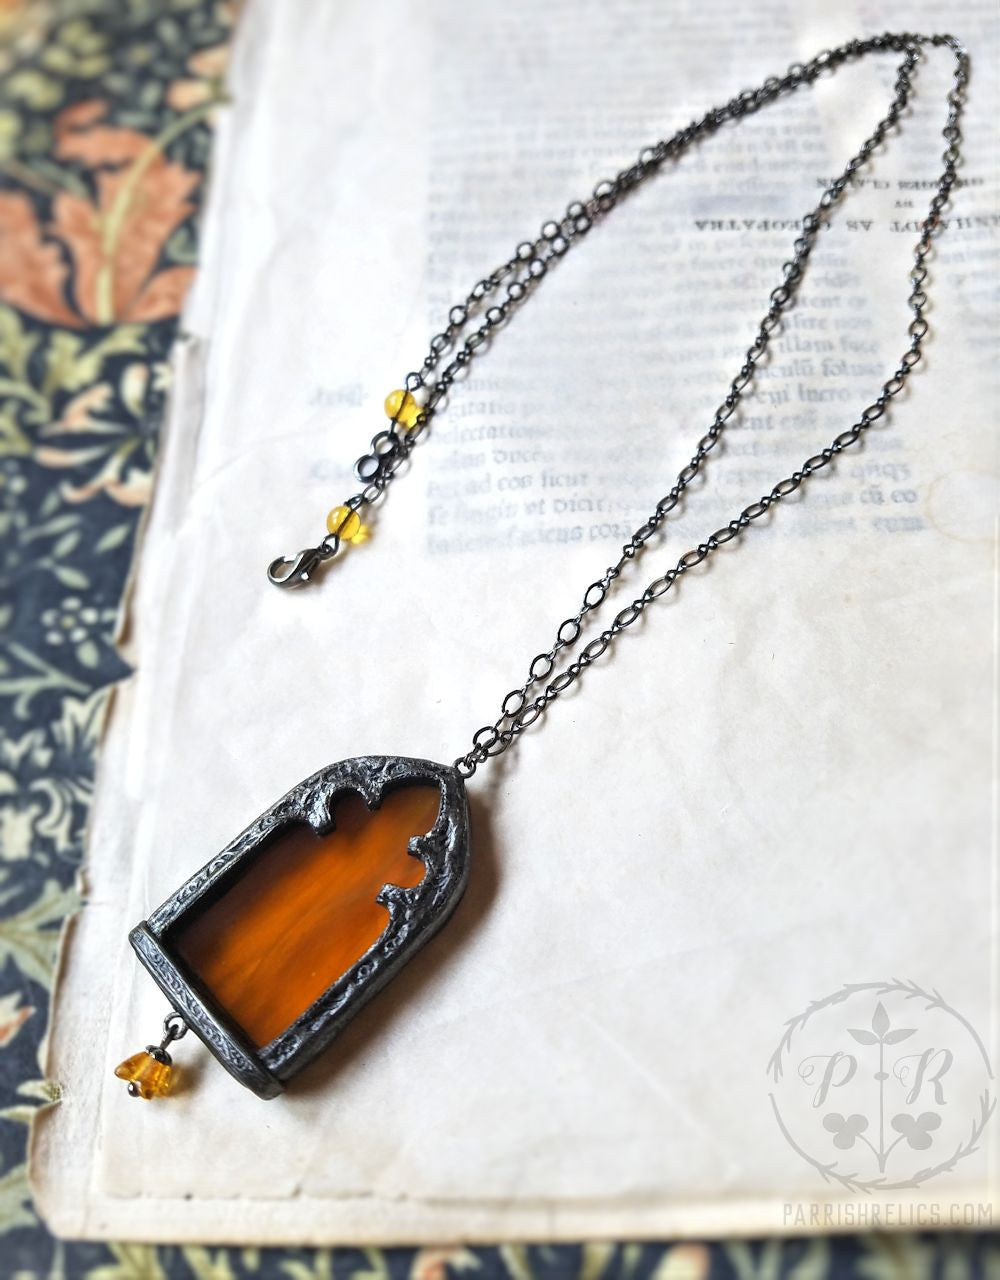 Hestia's Golden Fire ~ Stained Glass Window Amulet